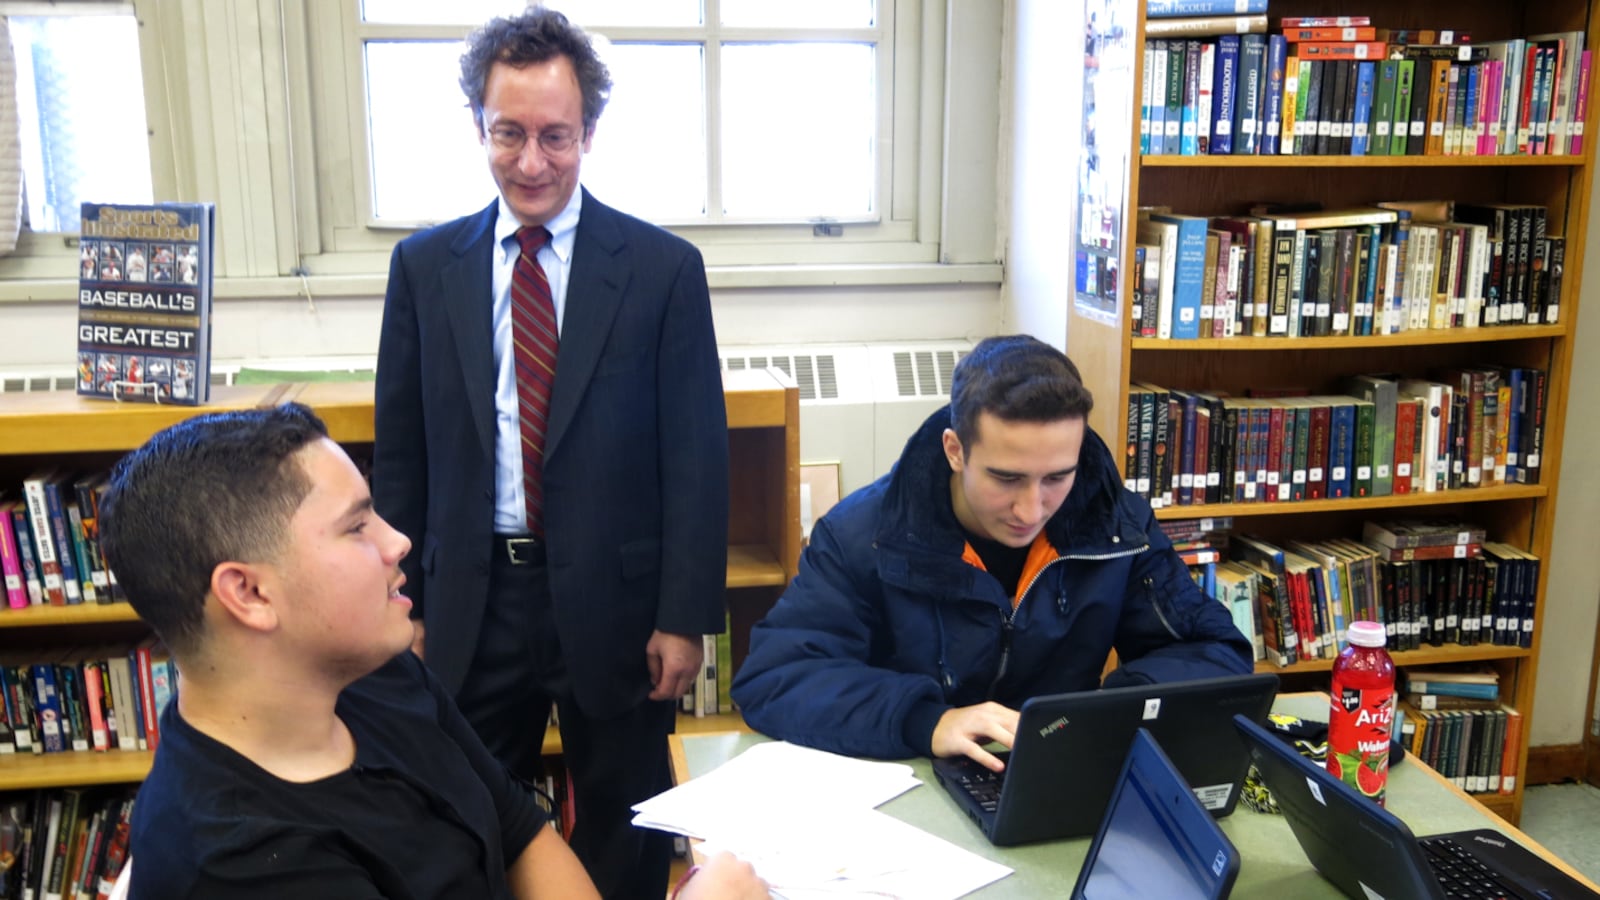 Deputy Chancellor Phil Weinberg visited the High School of Telecommunication Arts and Technology in 2014, the diverse ed-opt school in Brooklyn that he led for many years.